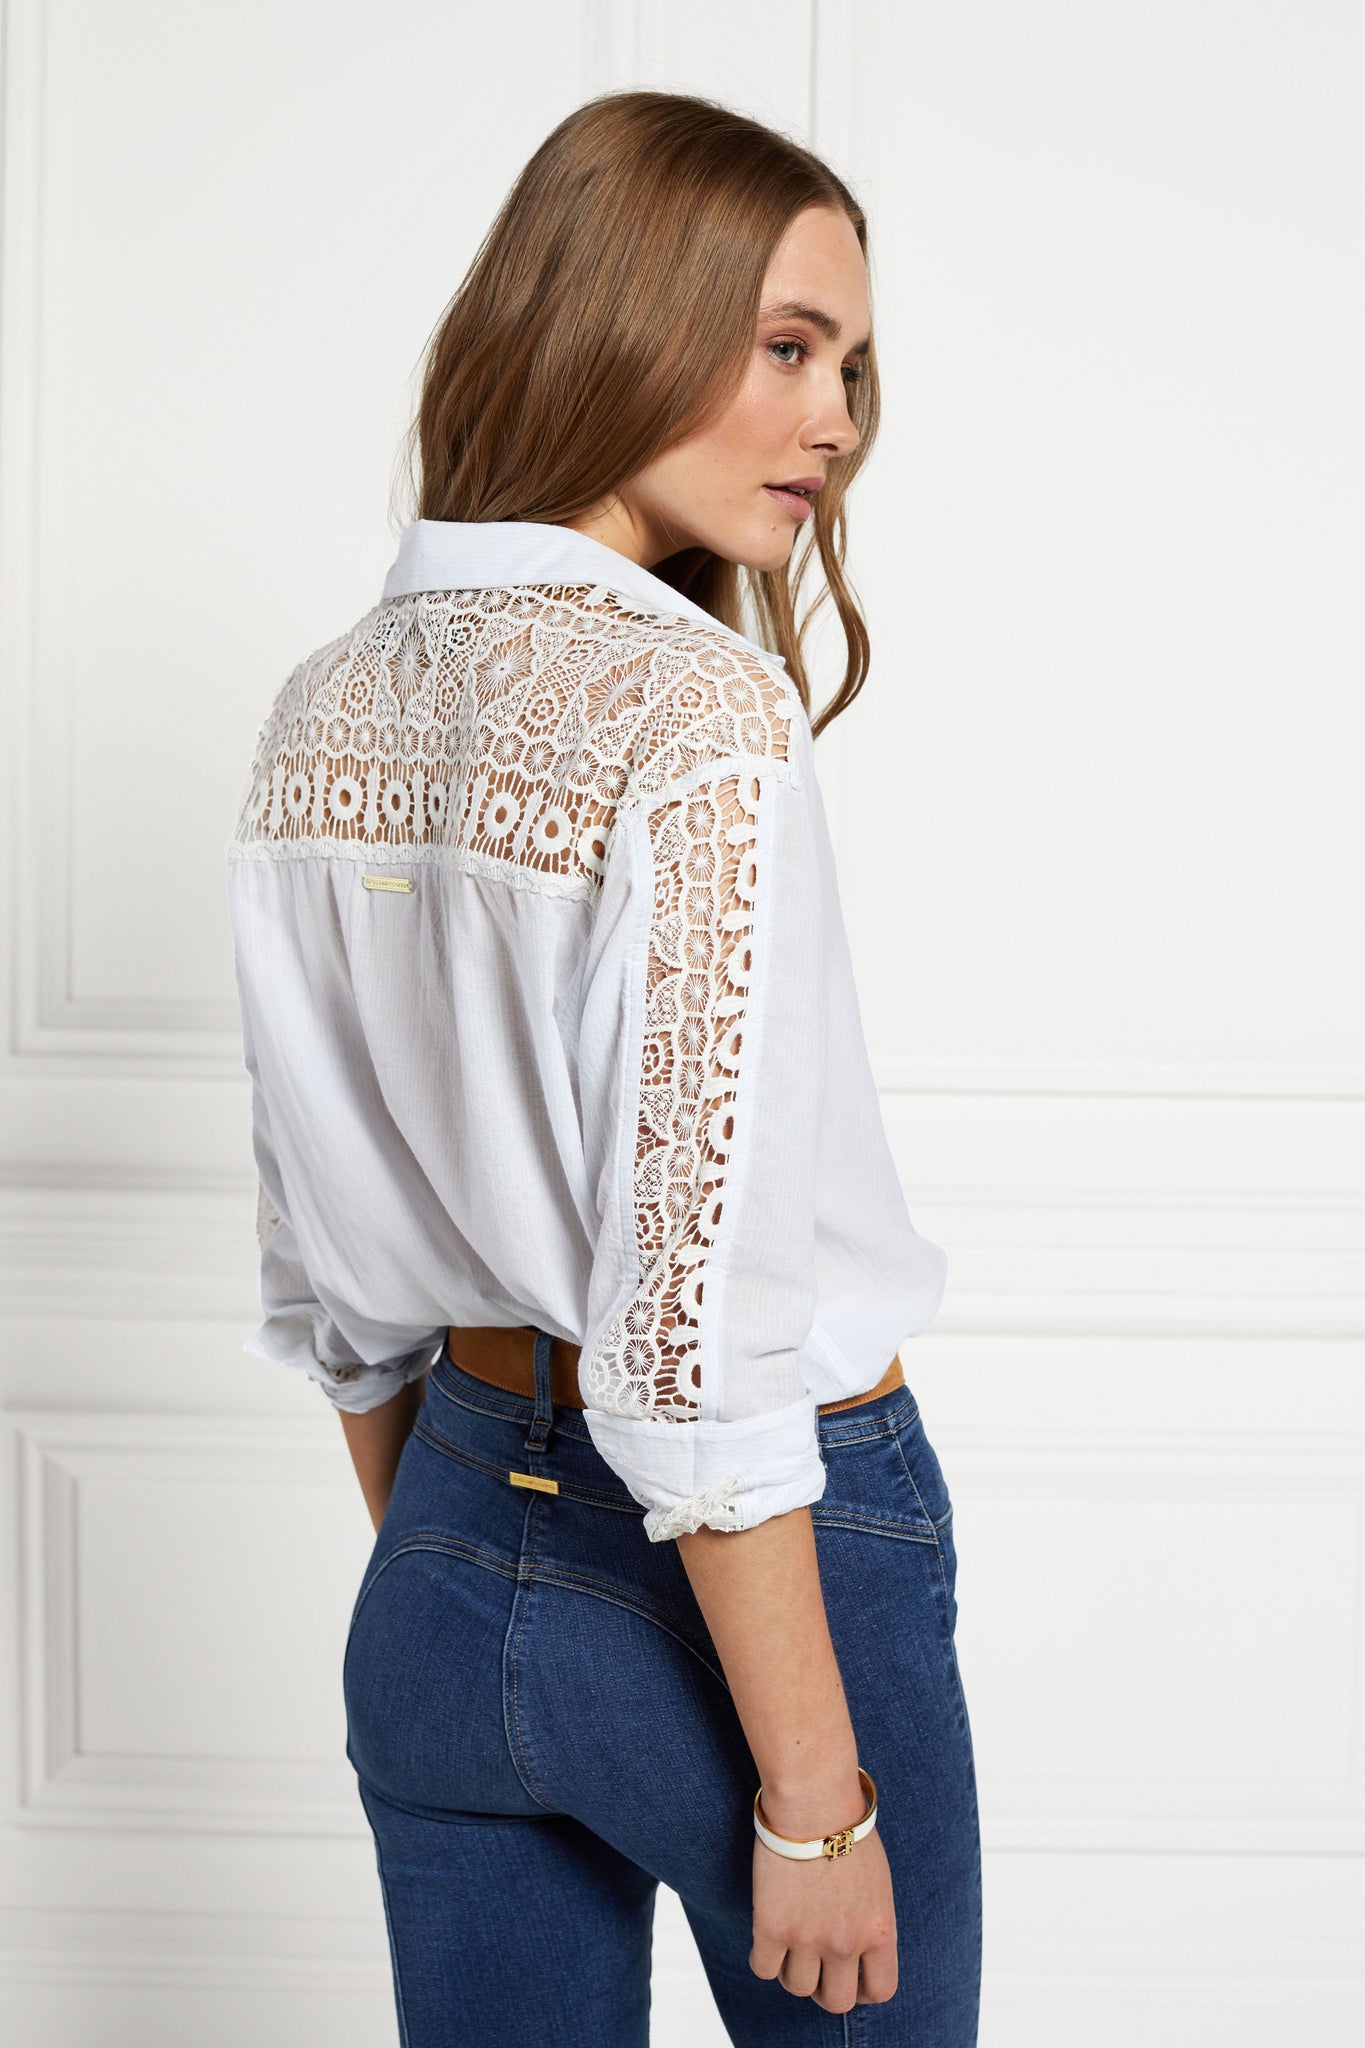 back image of relaxed shirt with pale blue and white stripes with lace panel insert across the back yolk and down the sleeves